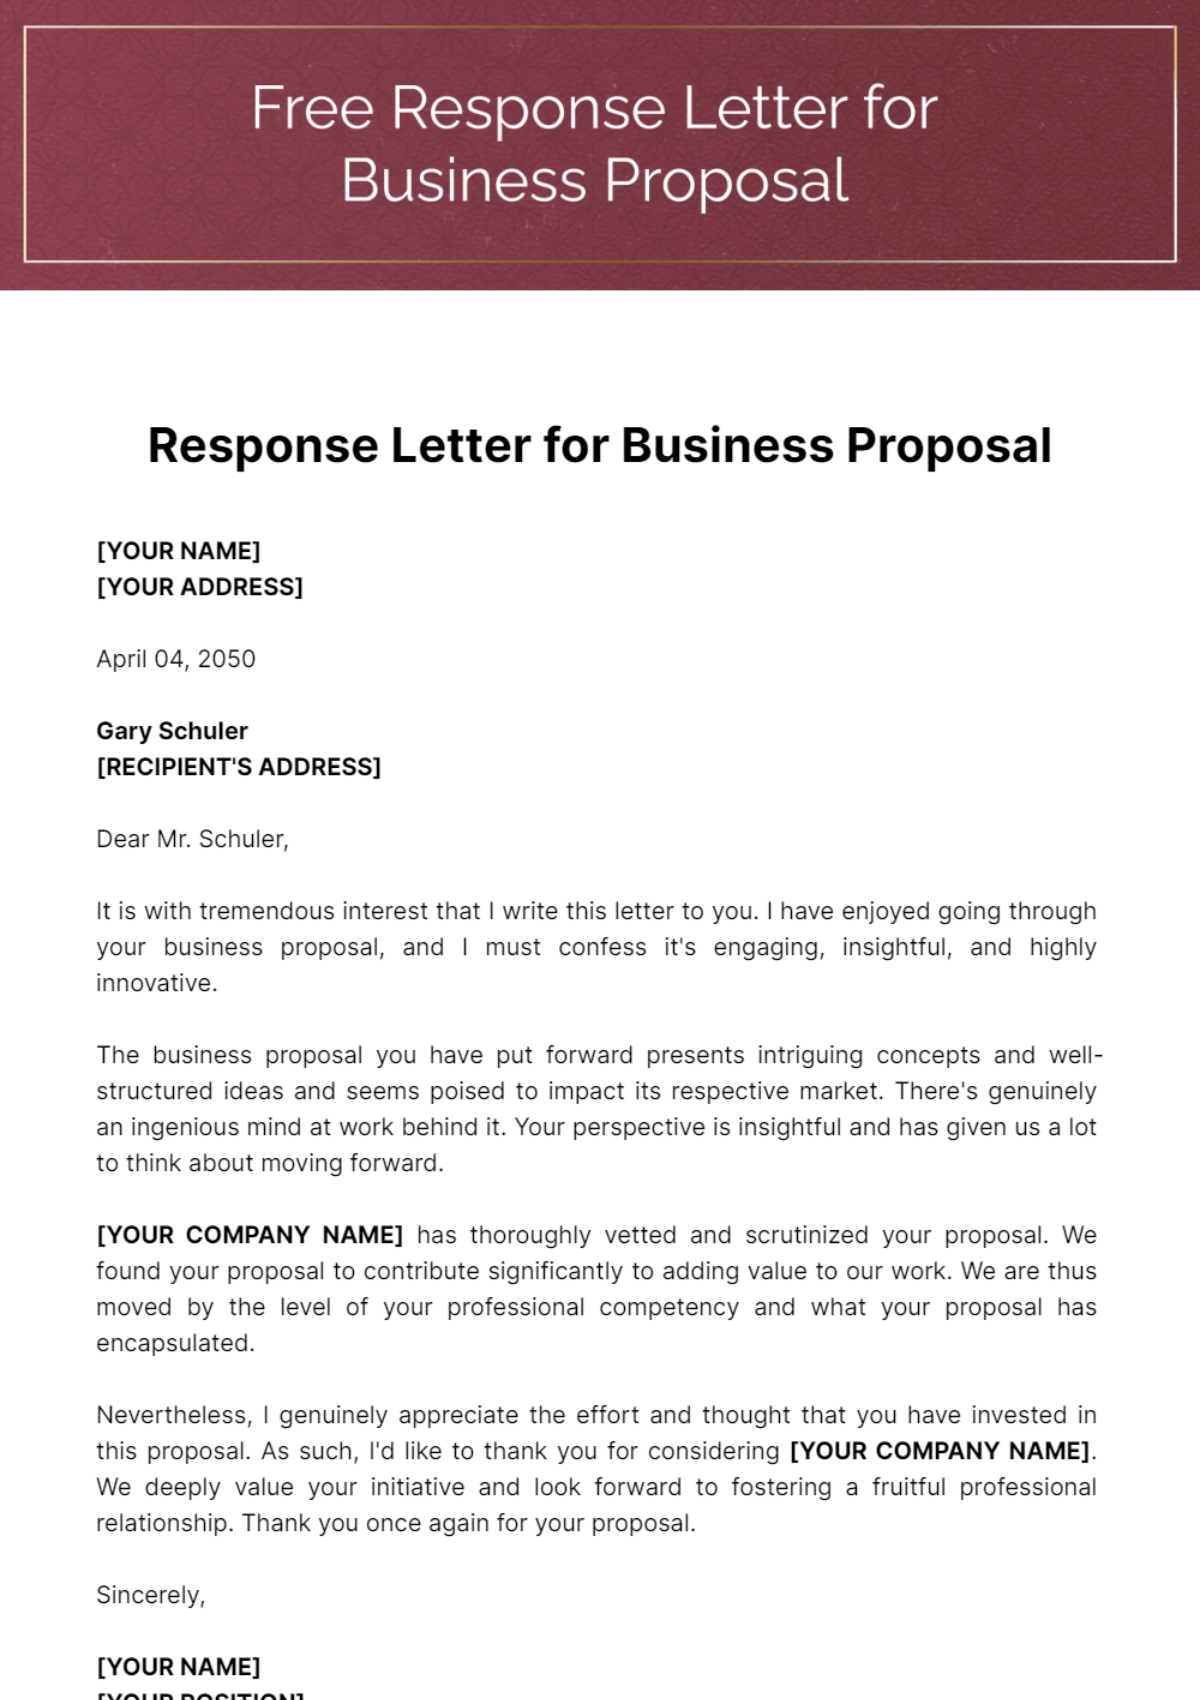 Free Response Letter for Business Proposal Template